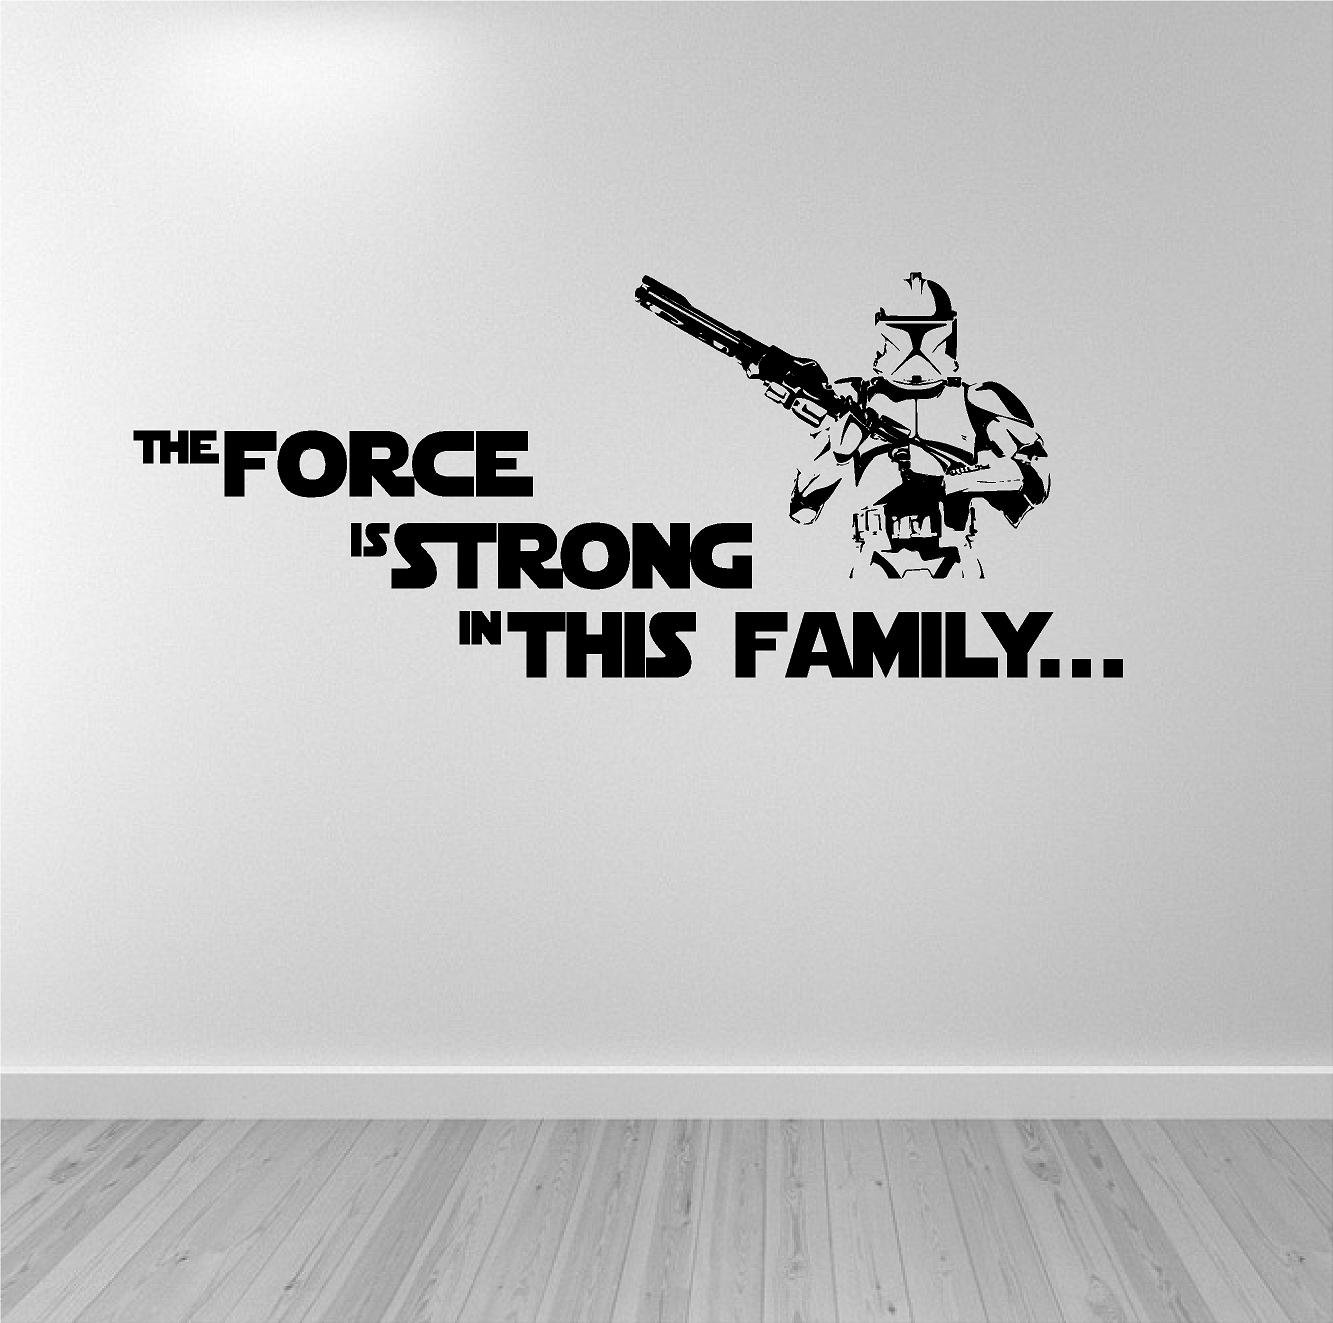 The Force is strong in this family 3